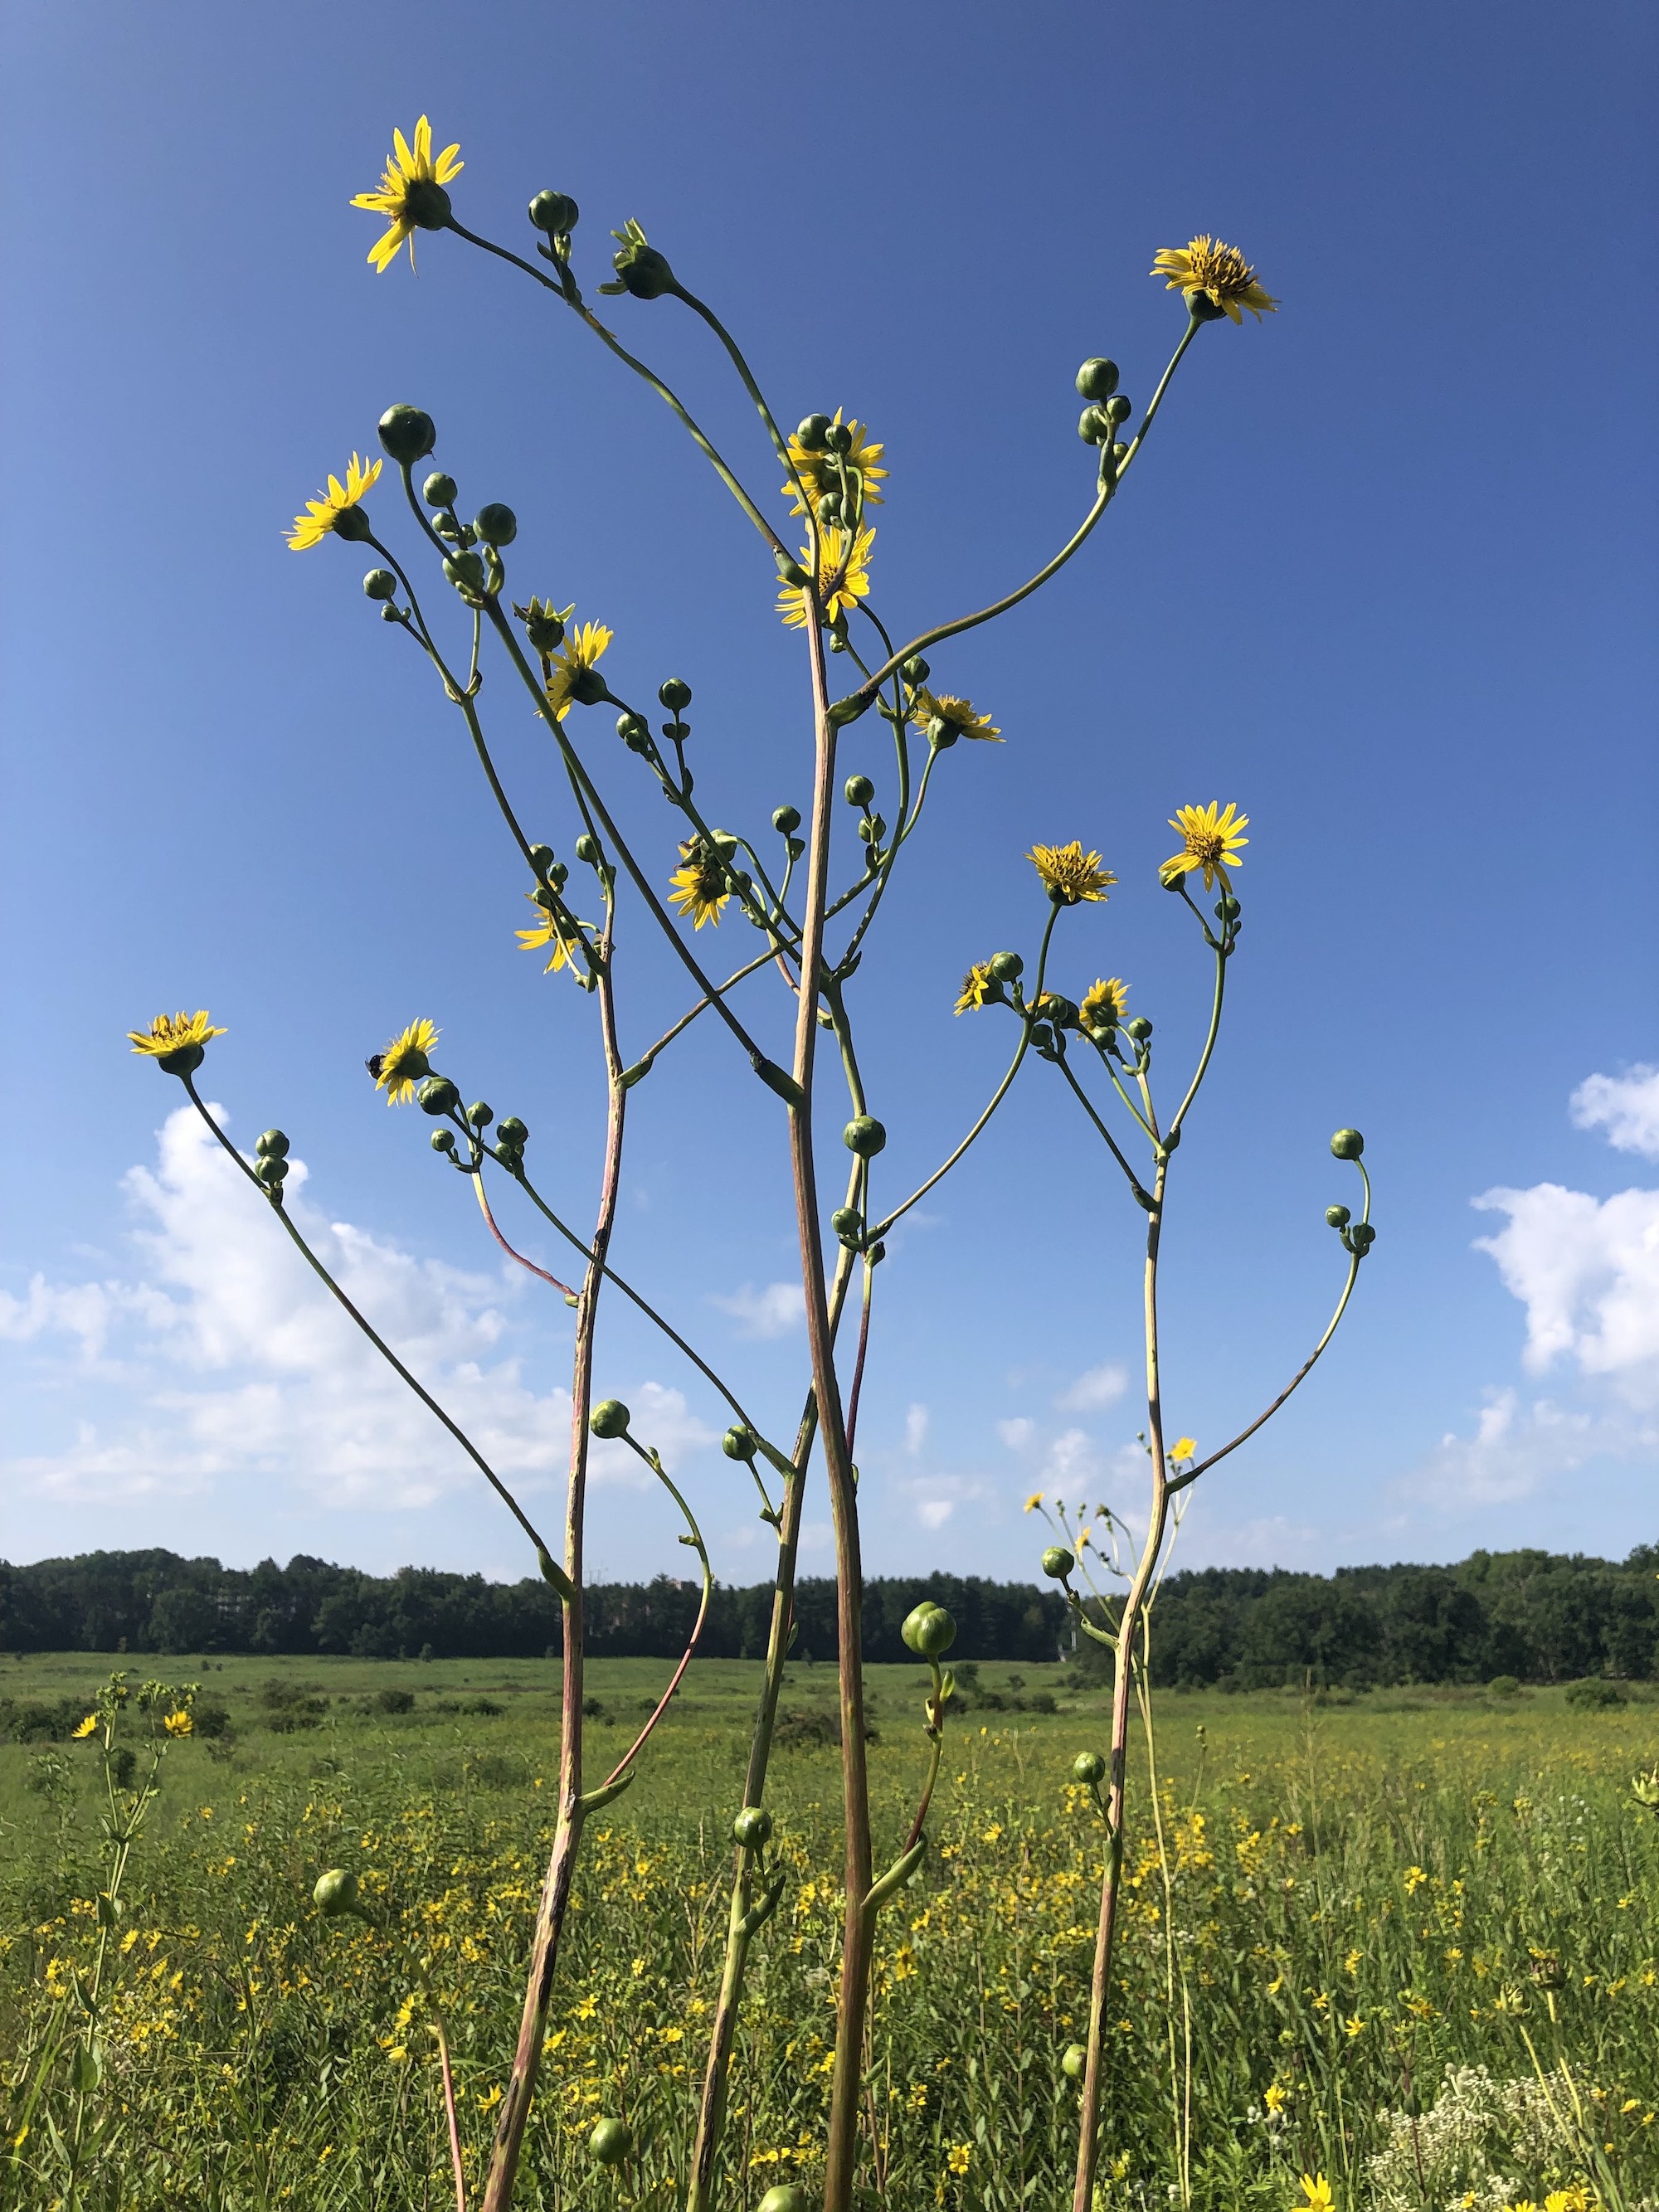 Basal-leaved Rosinweed in the UW-Madison Arborteum in Madison, Wisconsin on August 2, 2021.